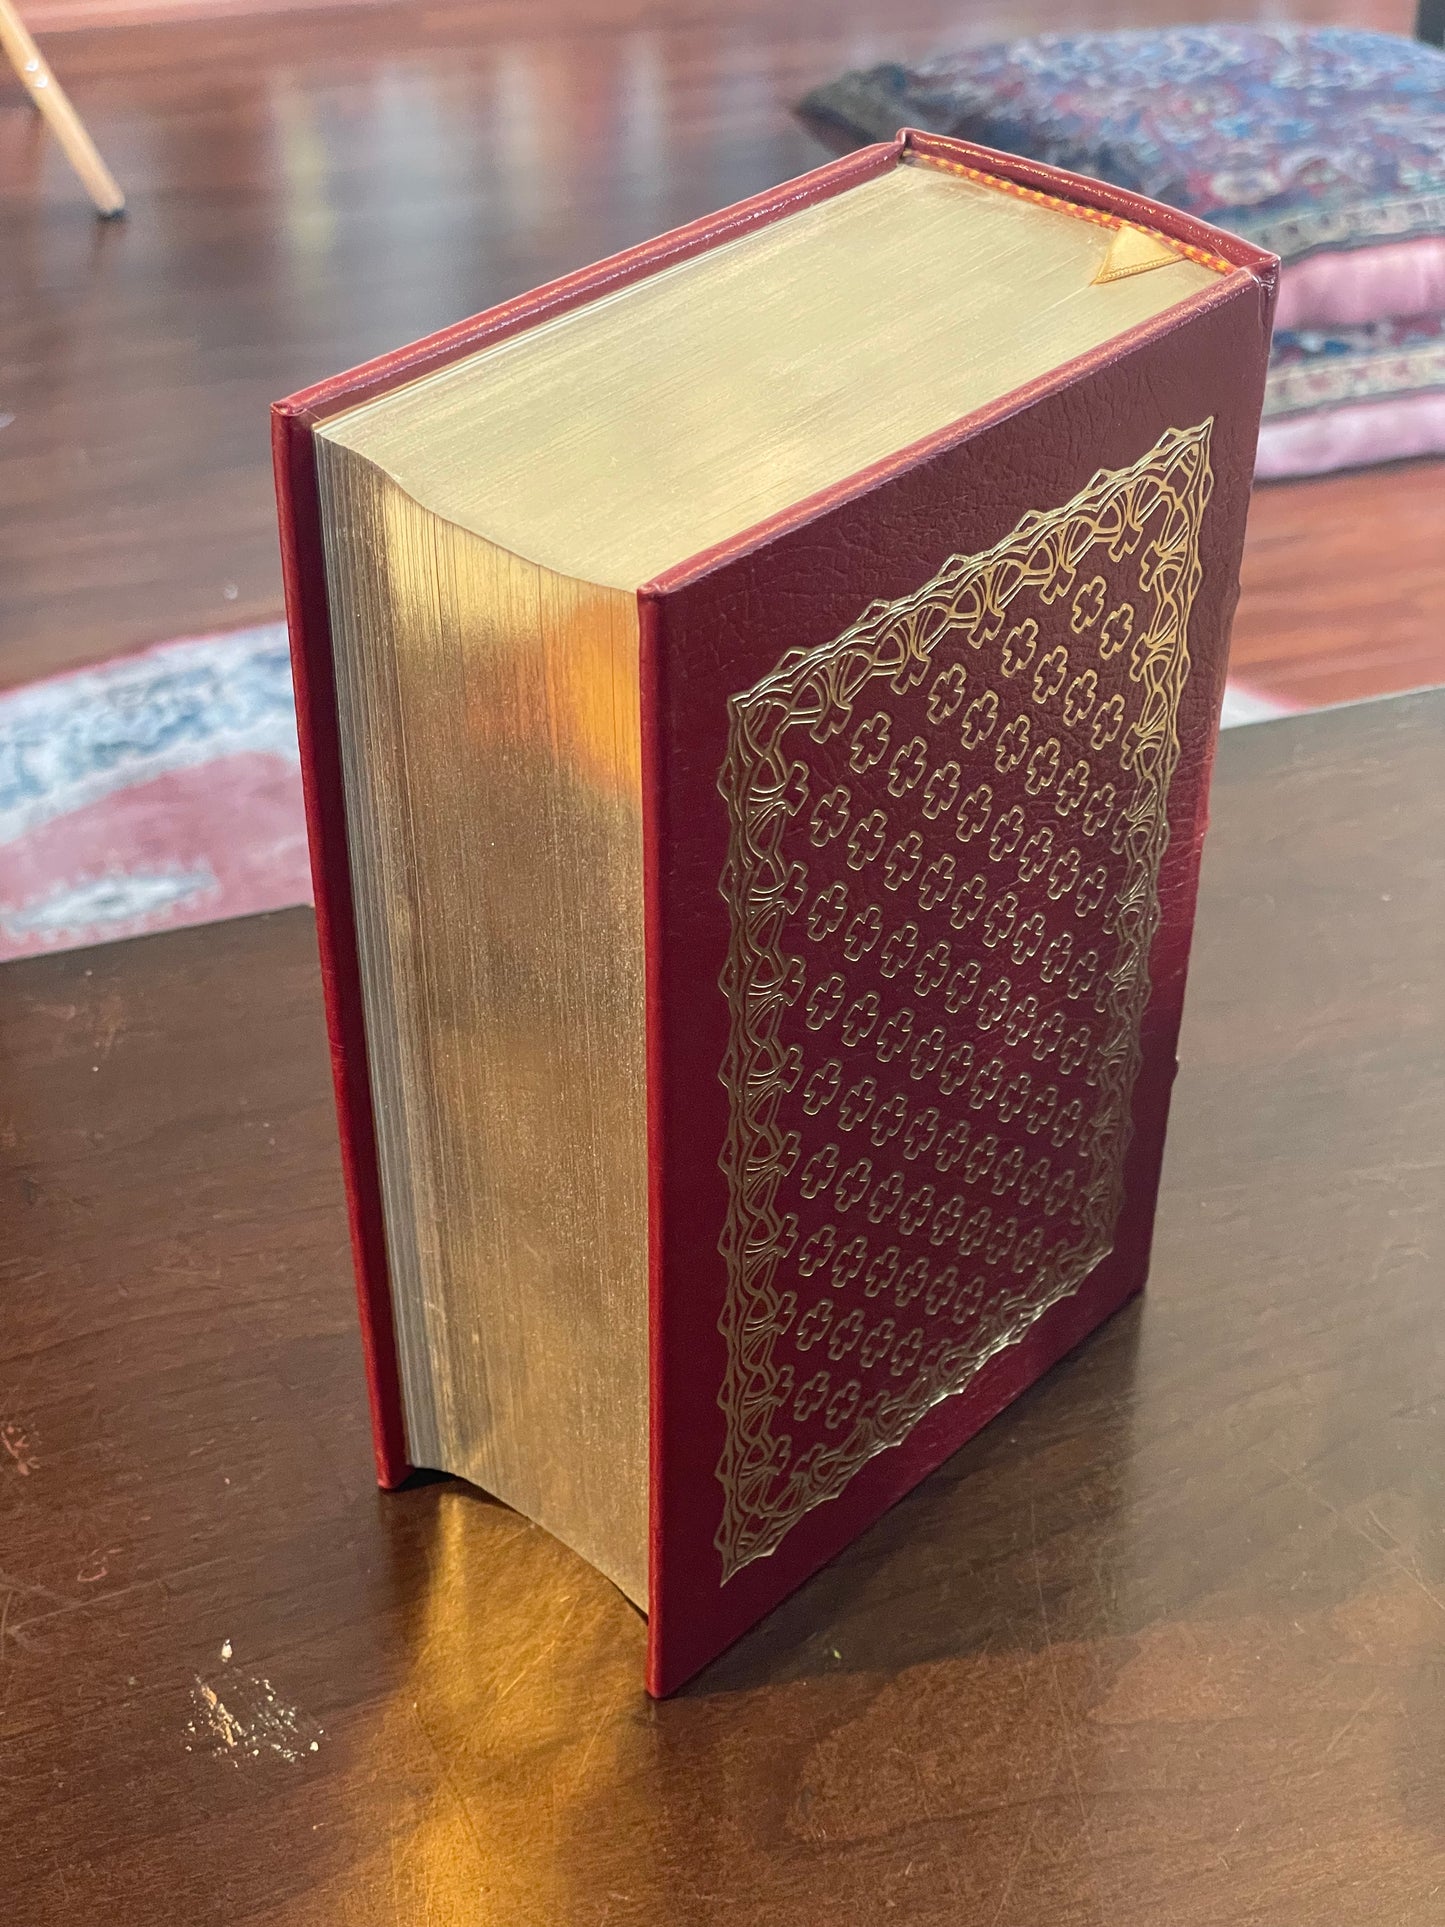 War and Peace by Leo Tolstoy (Easton Press)